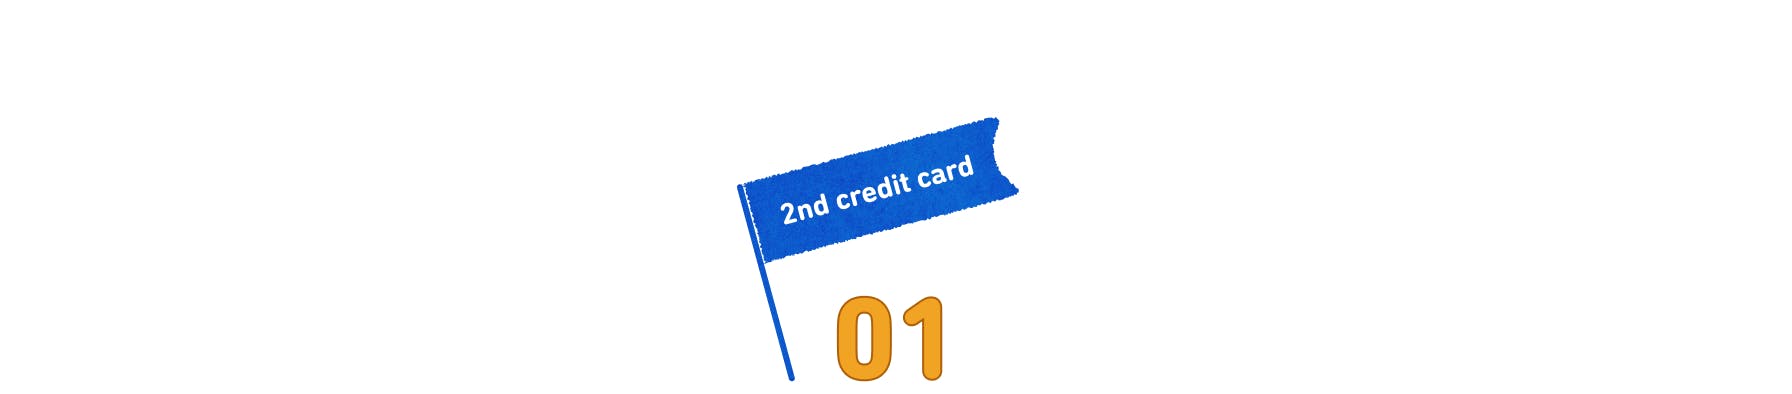 2nd credit card 01